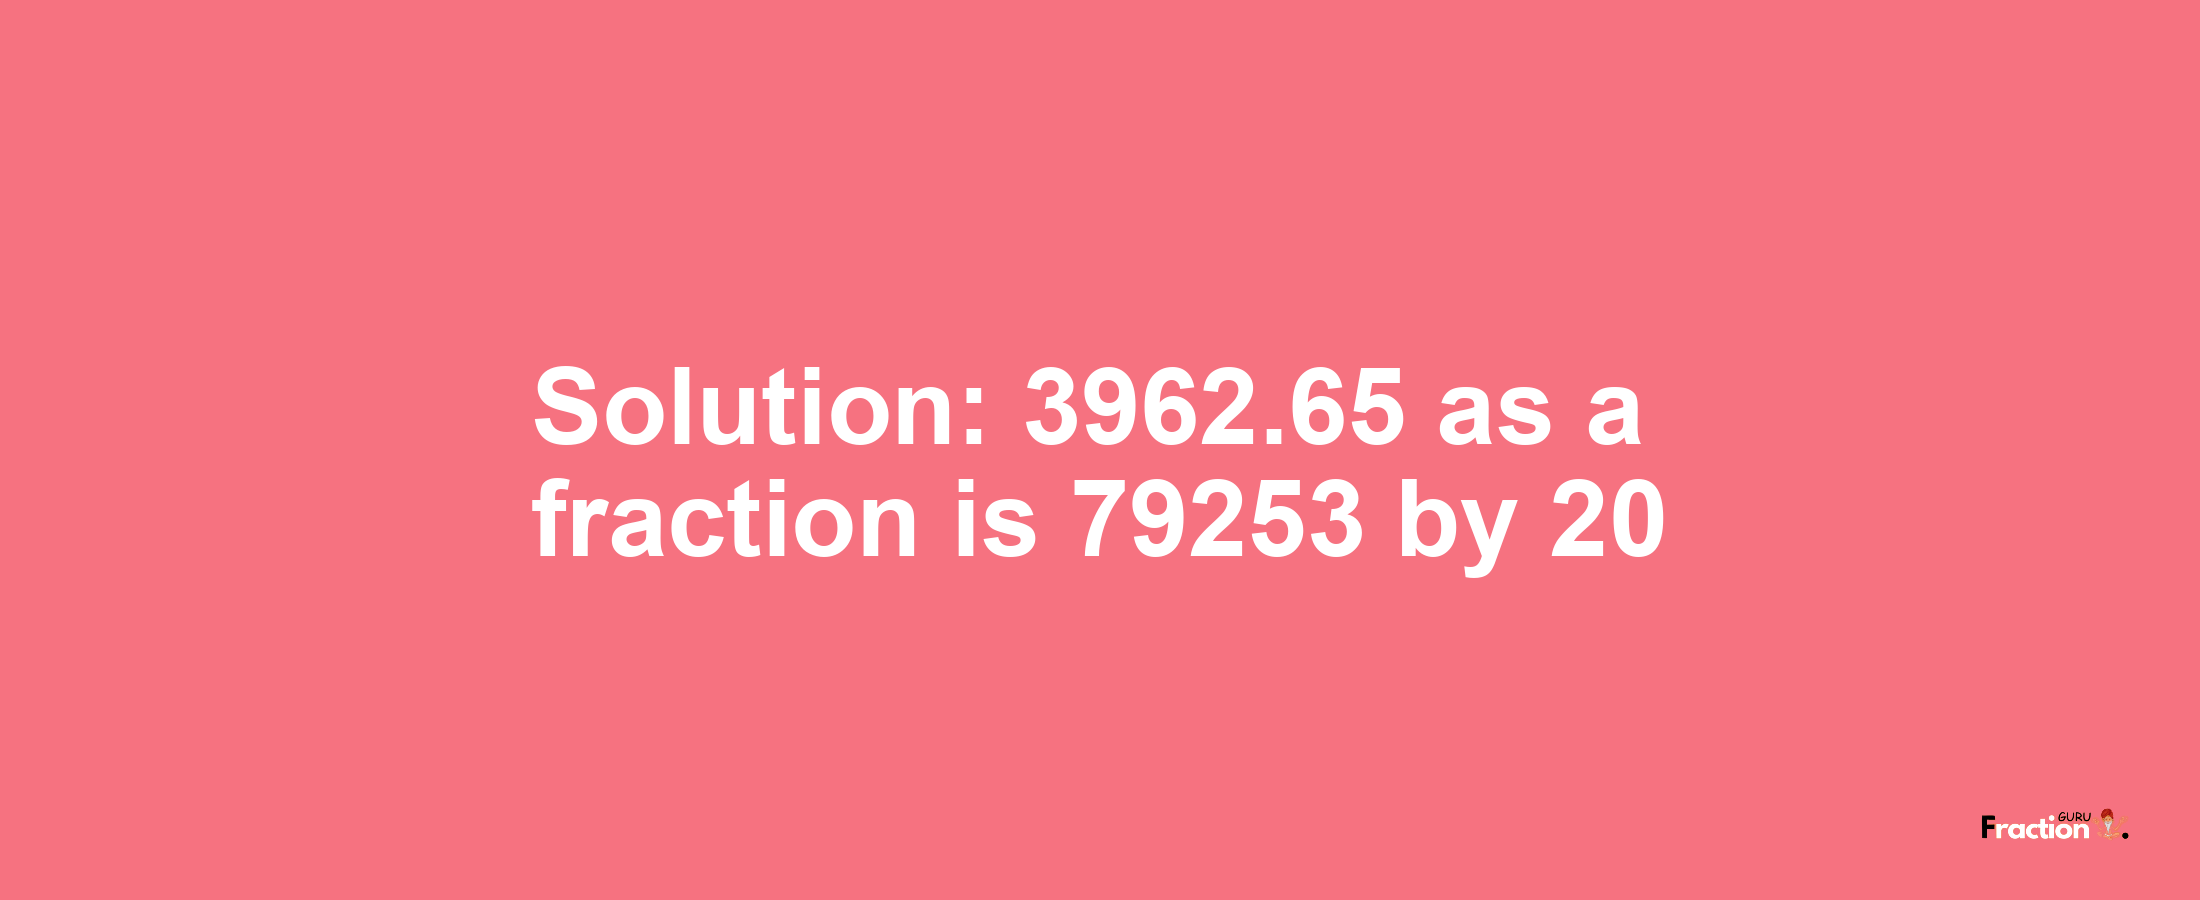 Solution:3962.65 as a fraction is 79253/20